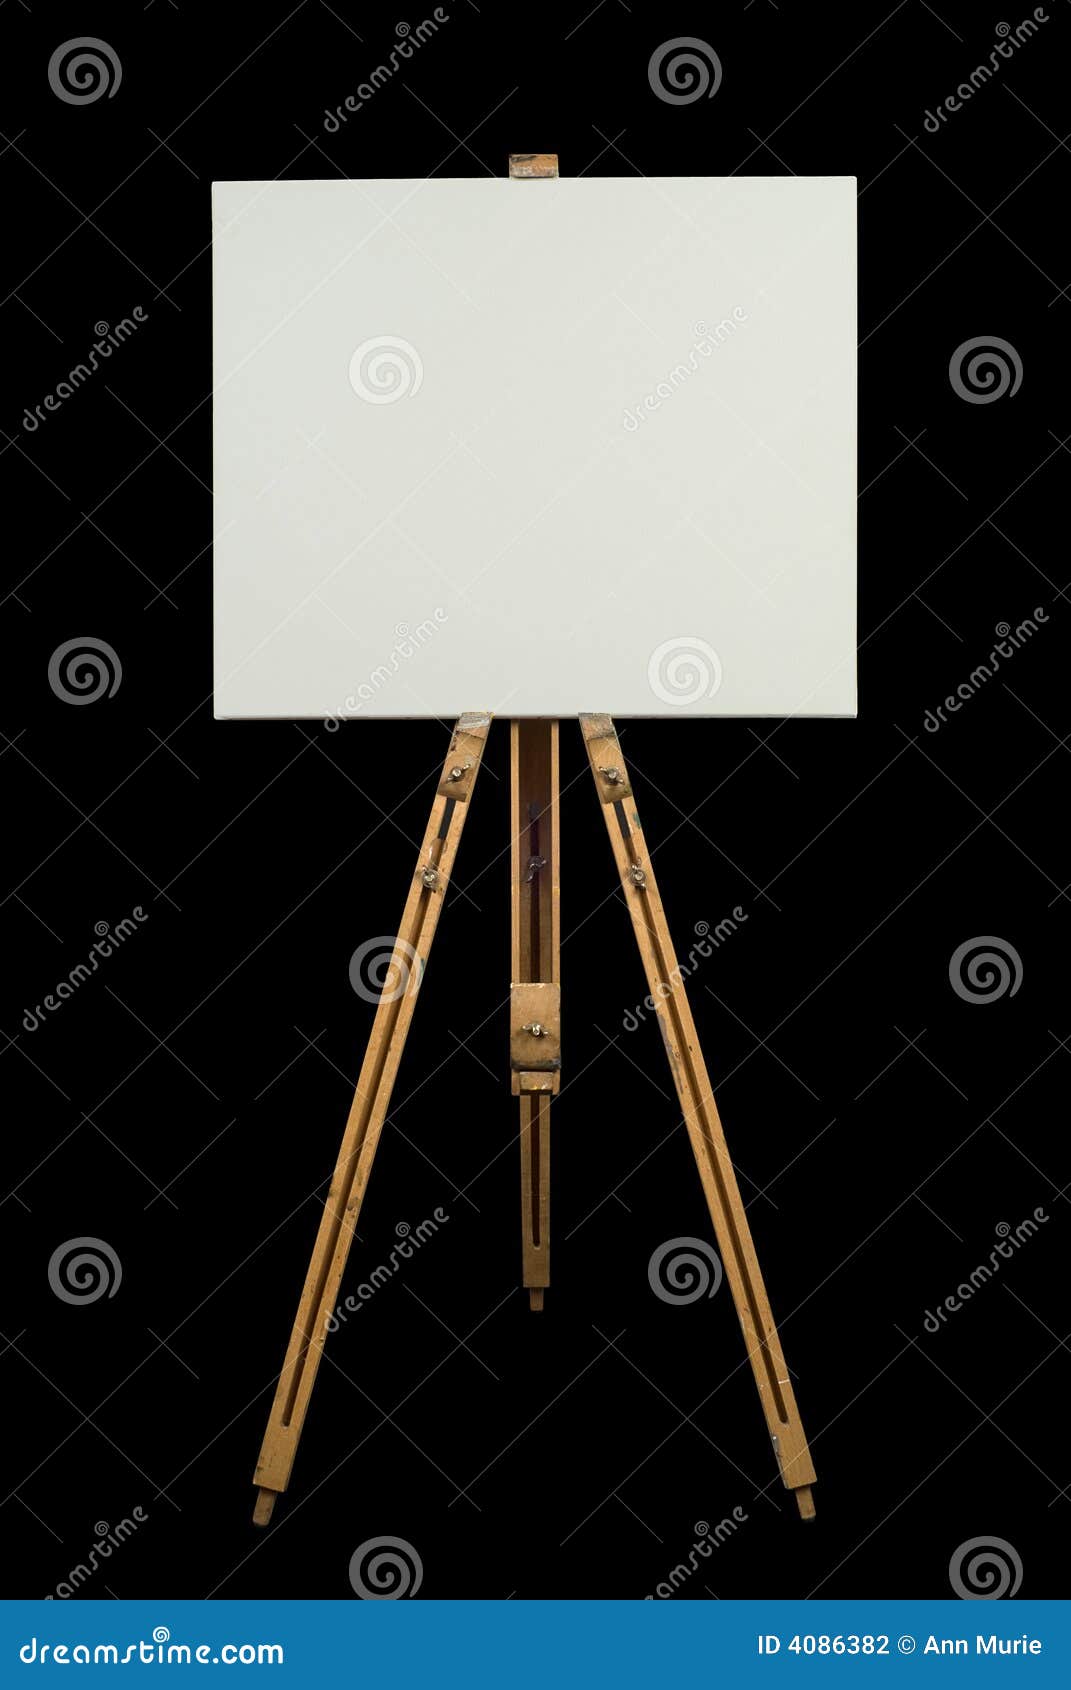 Small Easel with White Blank Cloth on a Wooden Table. Miniature